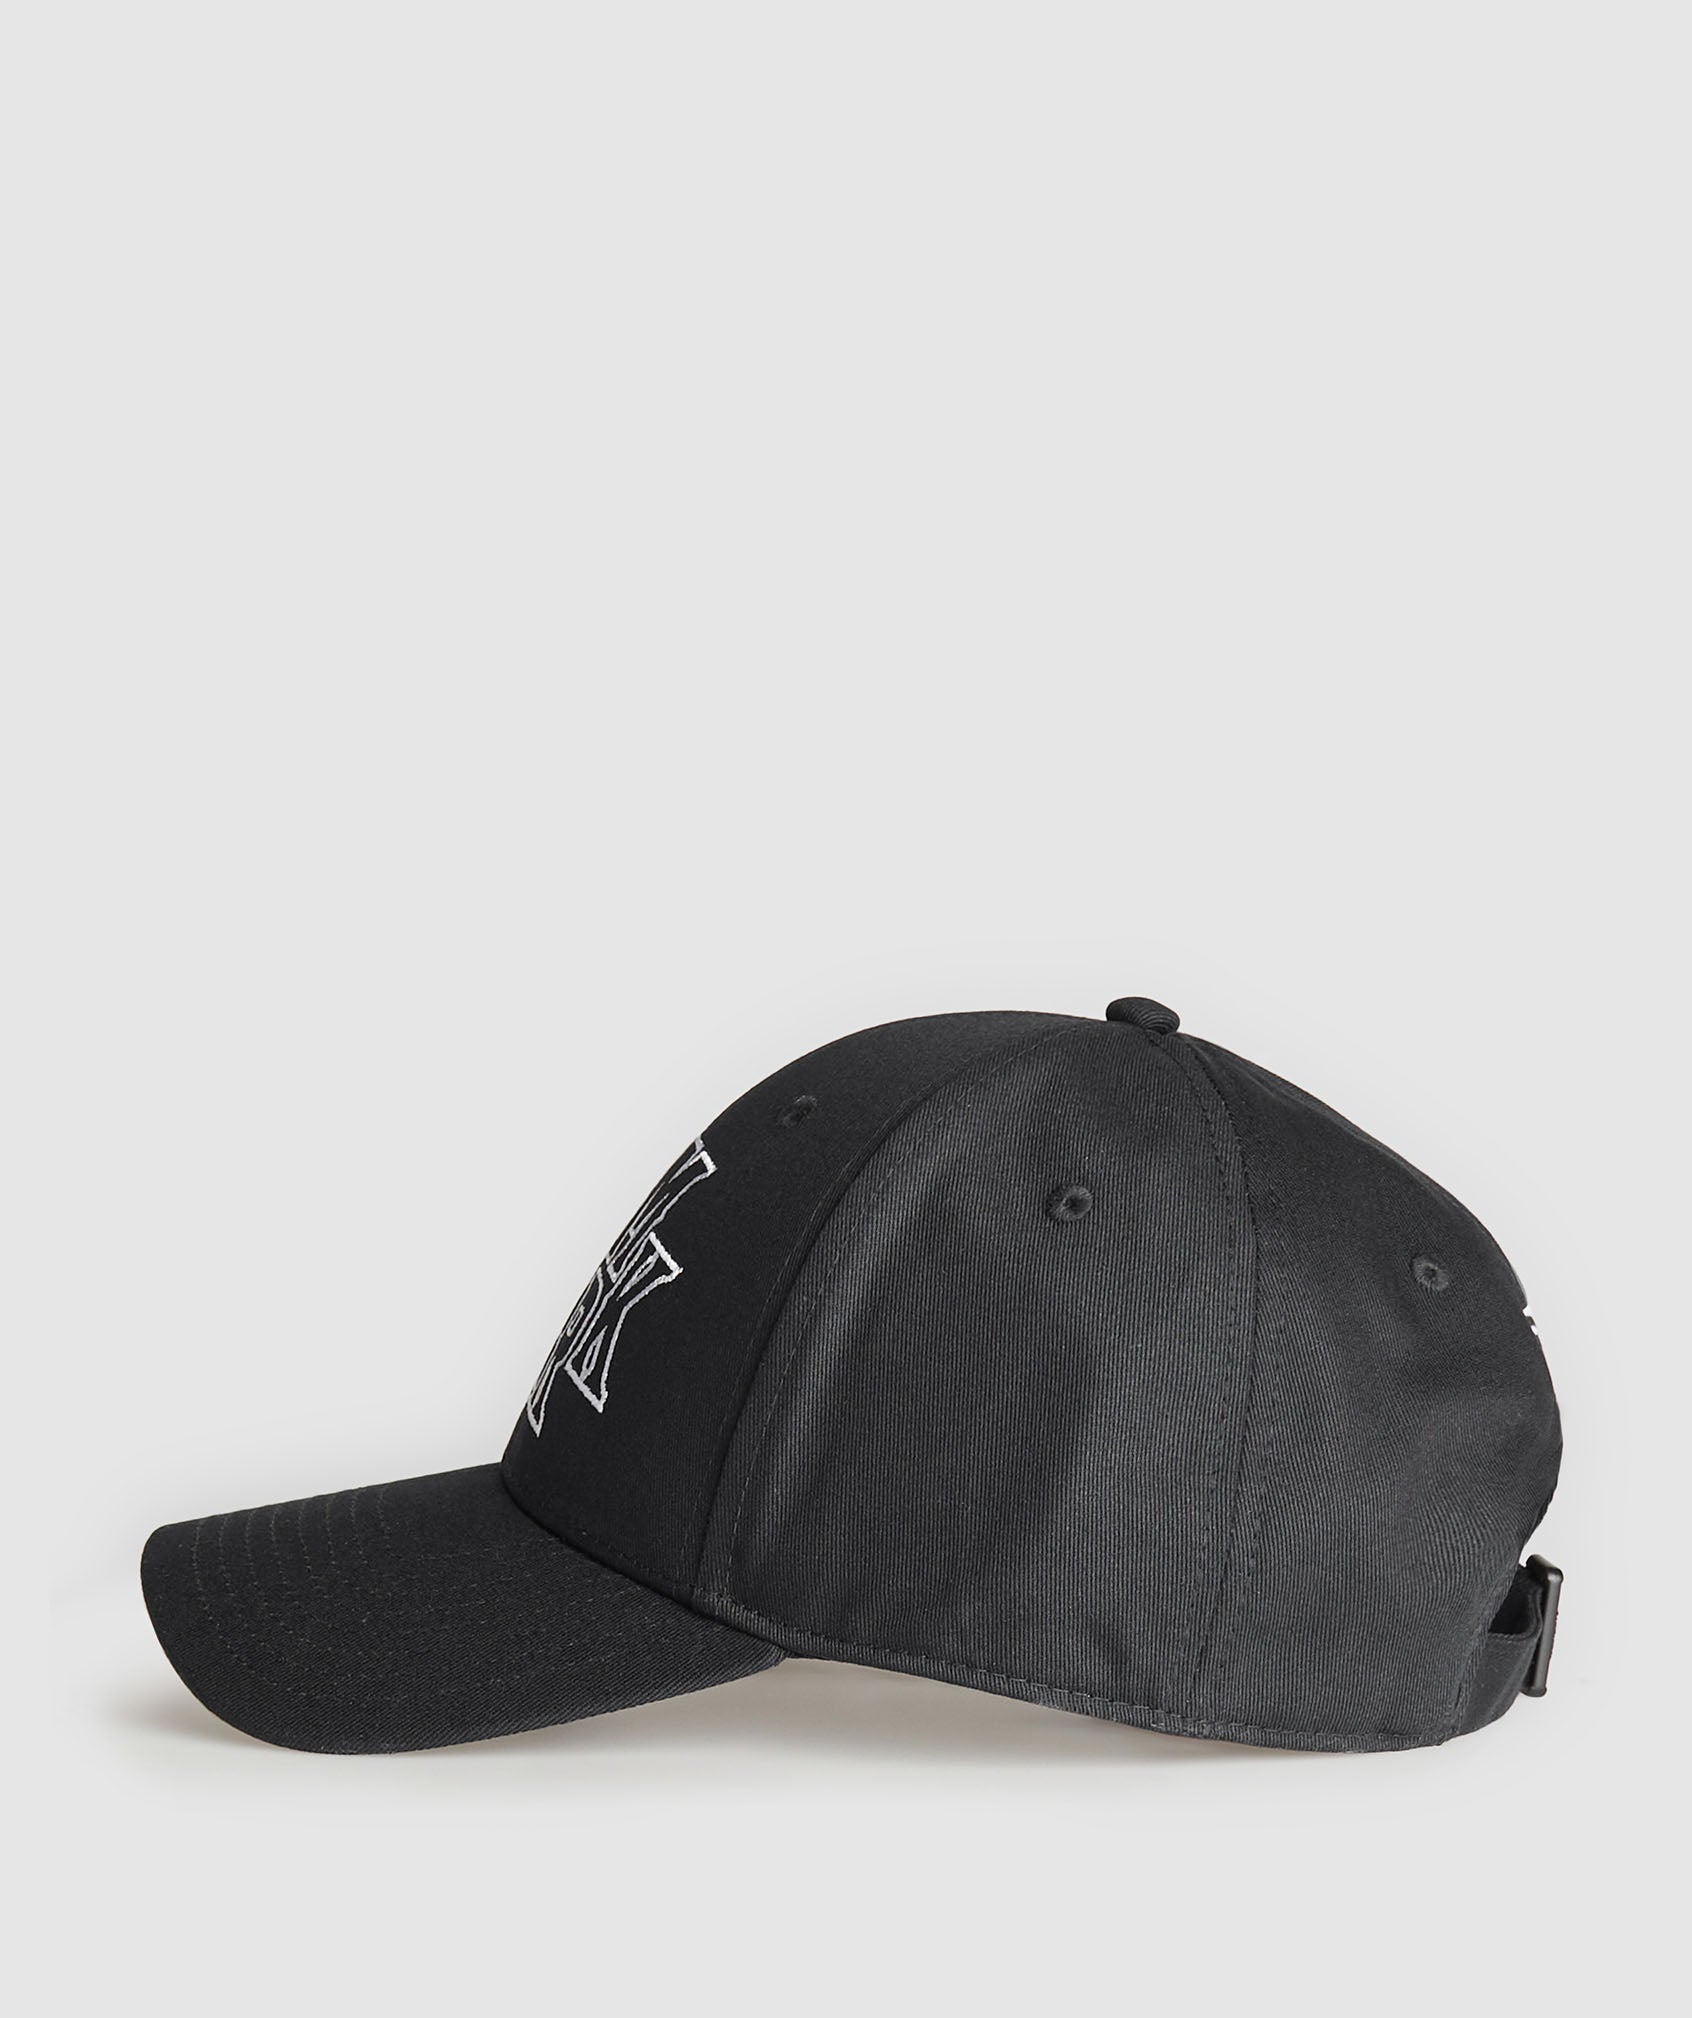 Stacked Cap in Black - view 3